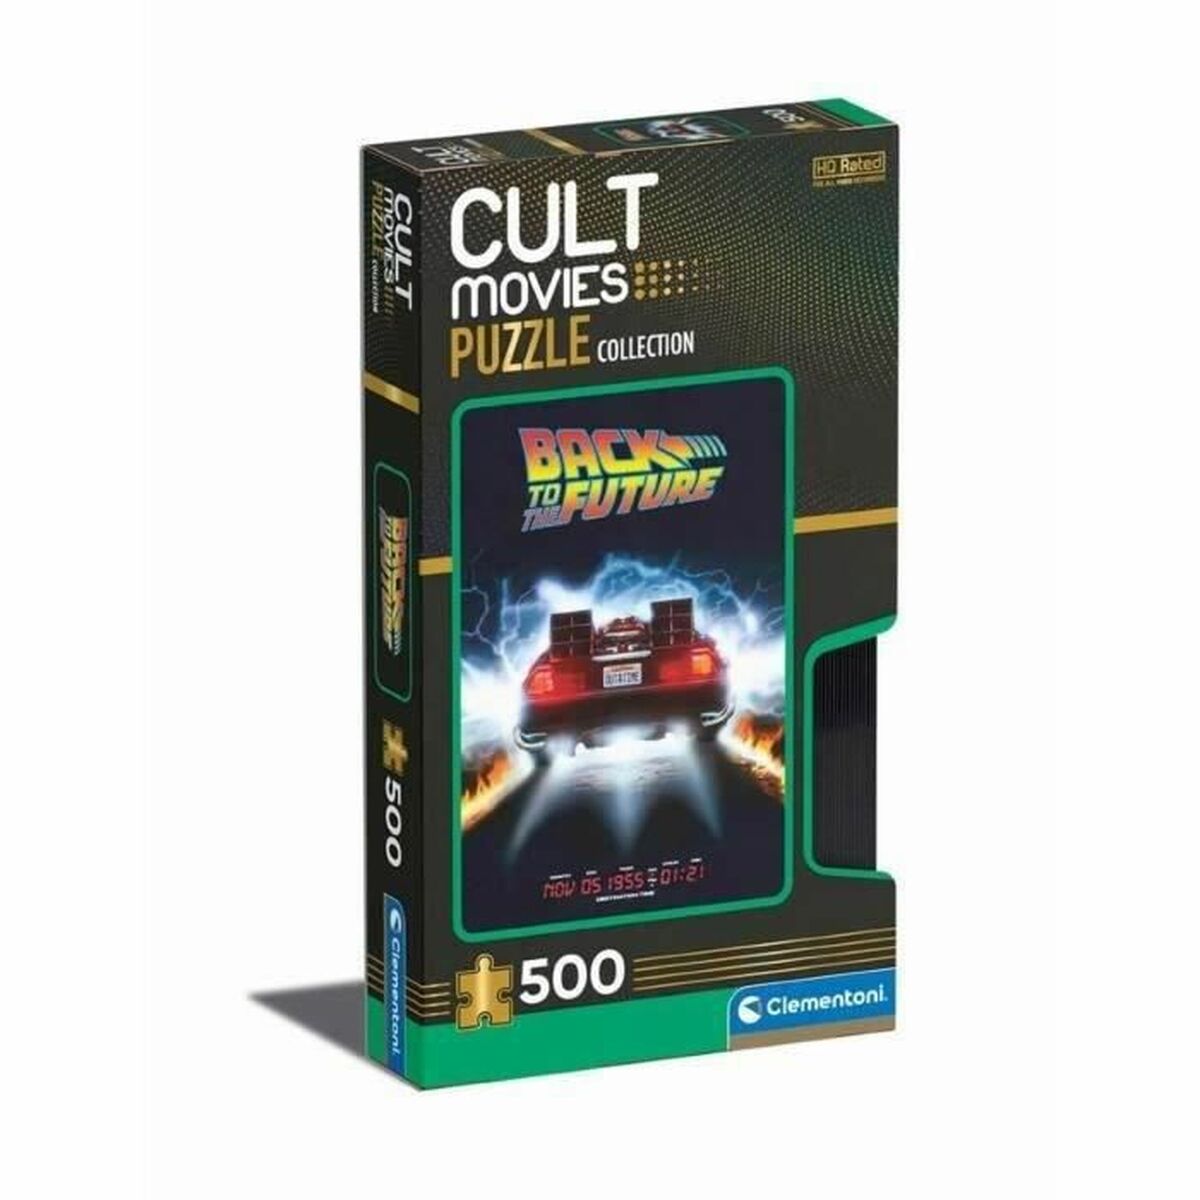 Puzzel Clementoni Cult Movies - Back to the Future 500 Onderdelen